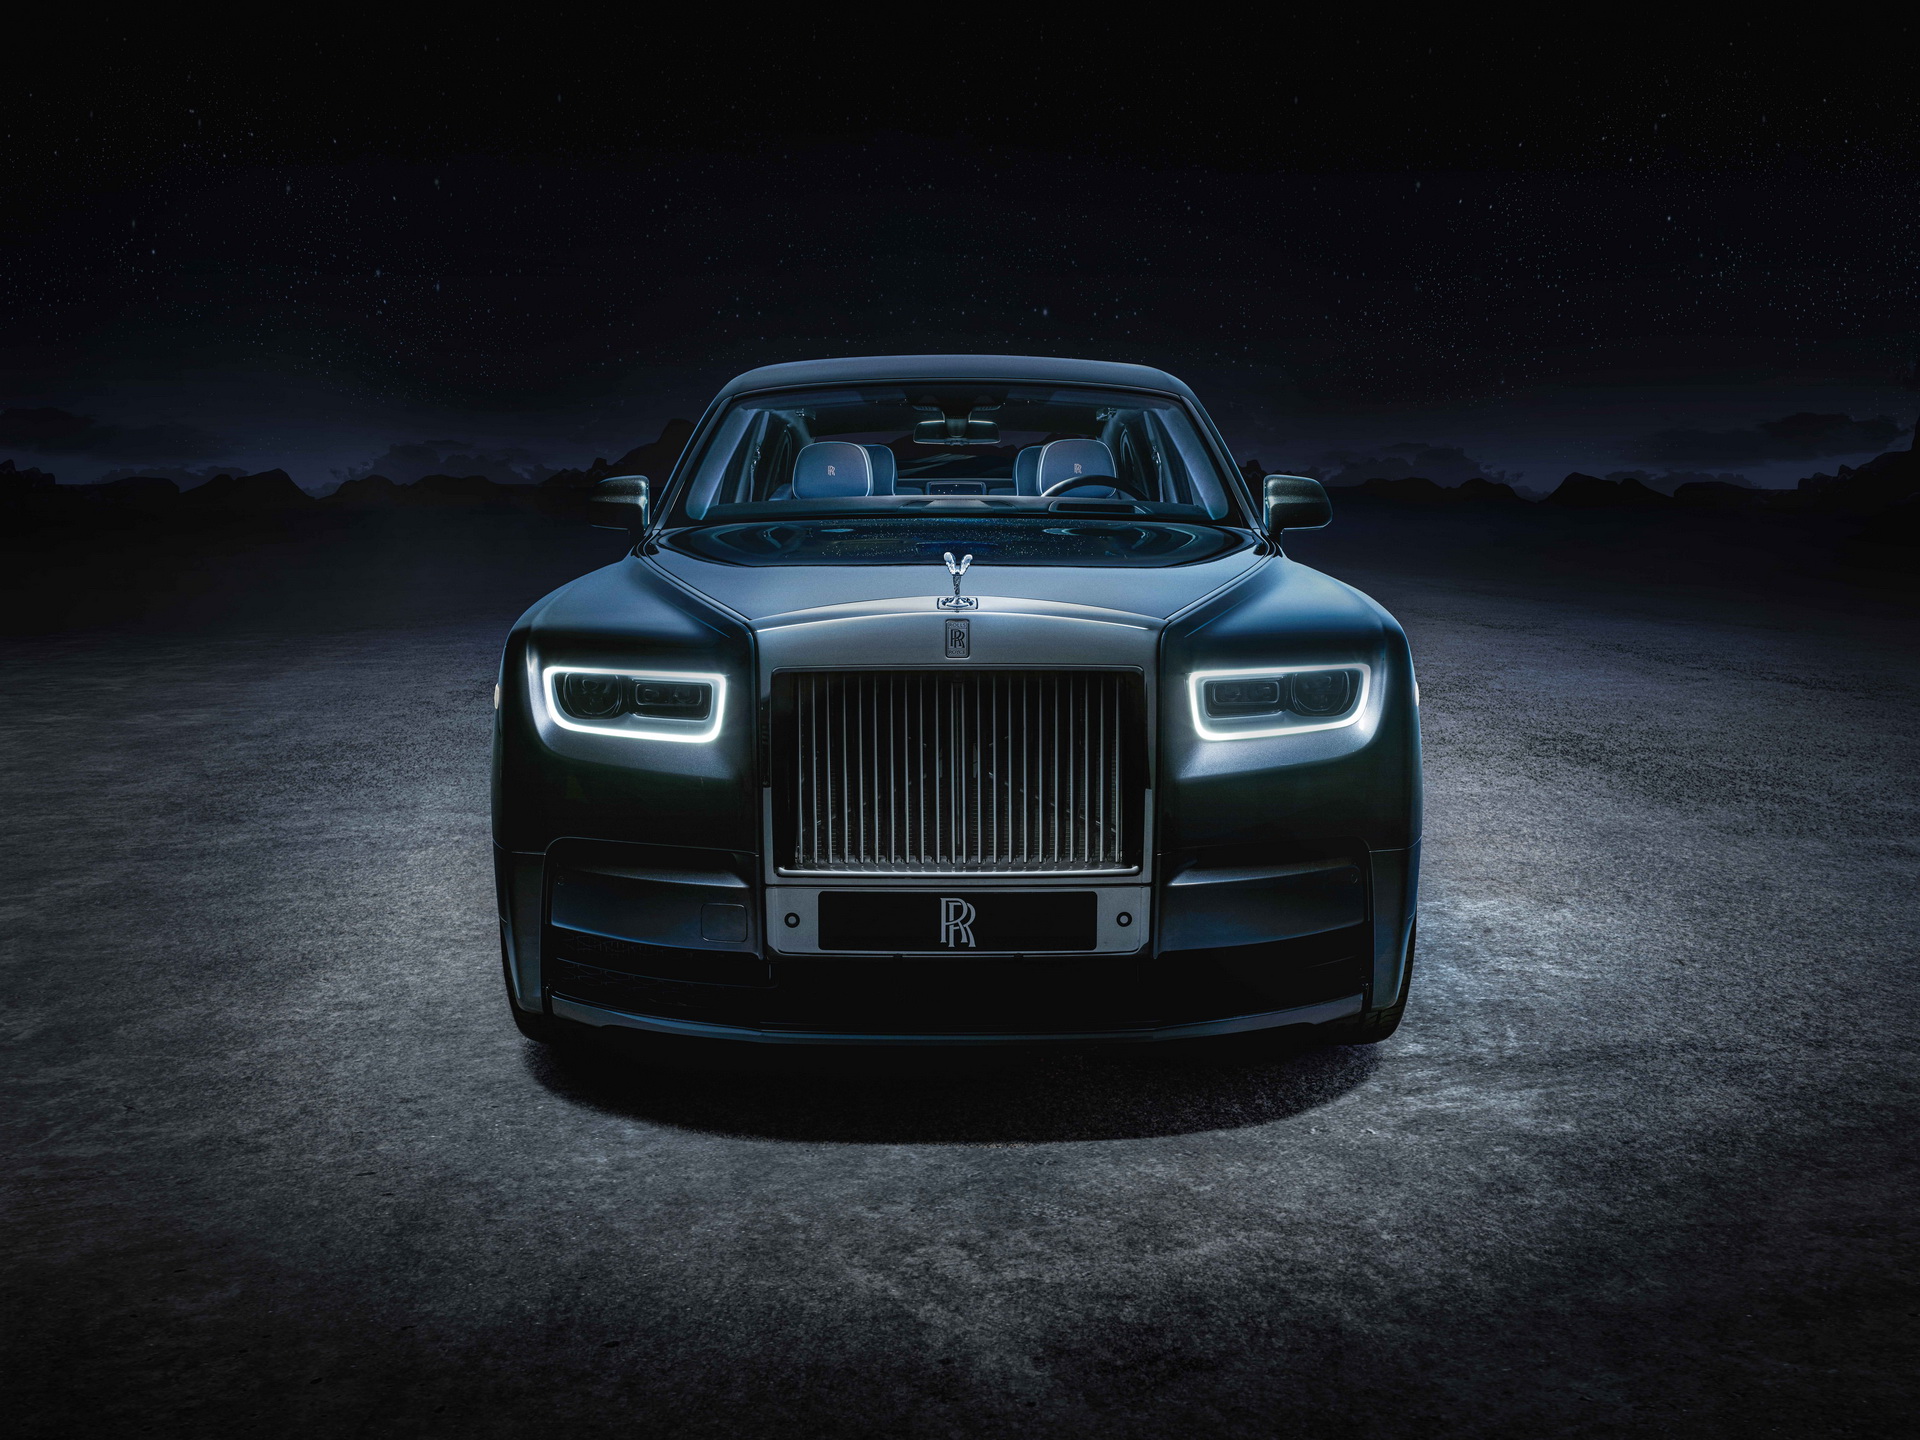 Rolls-Royce will only manufacture electric cars starting from 2030